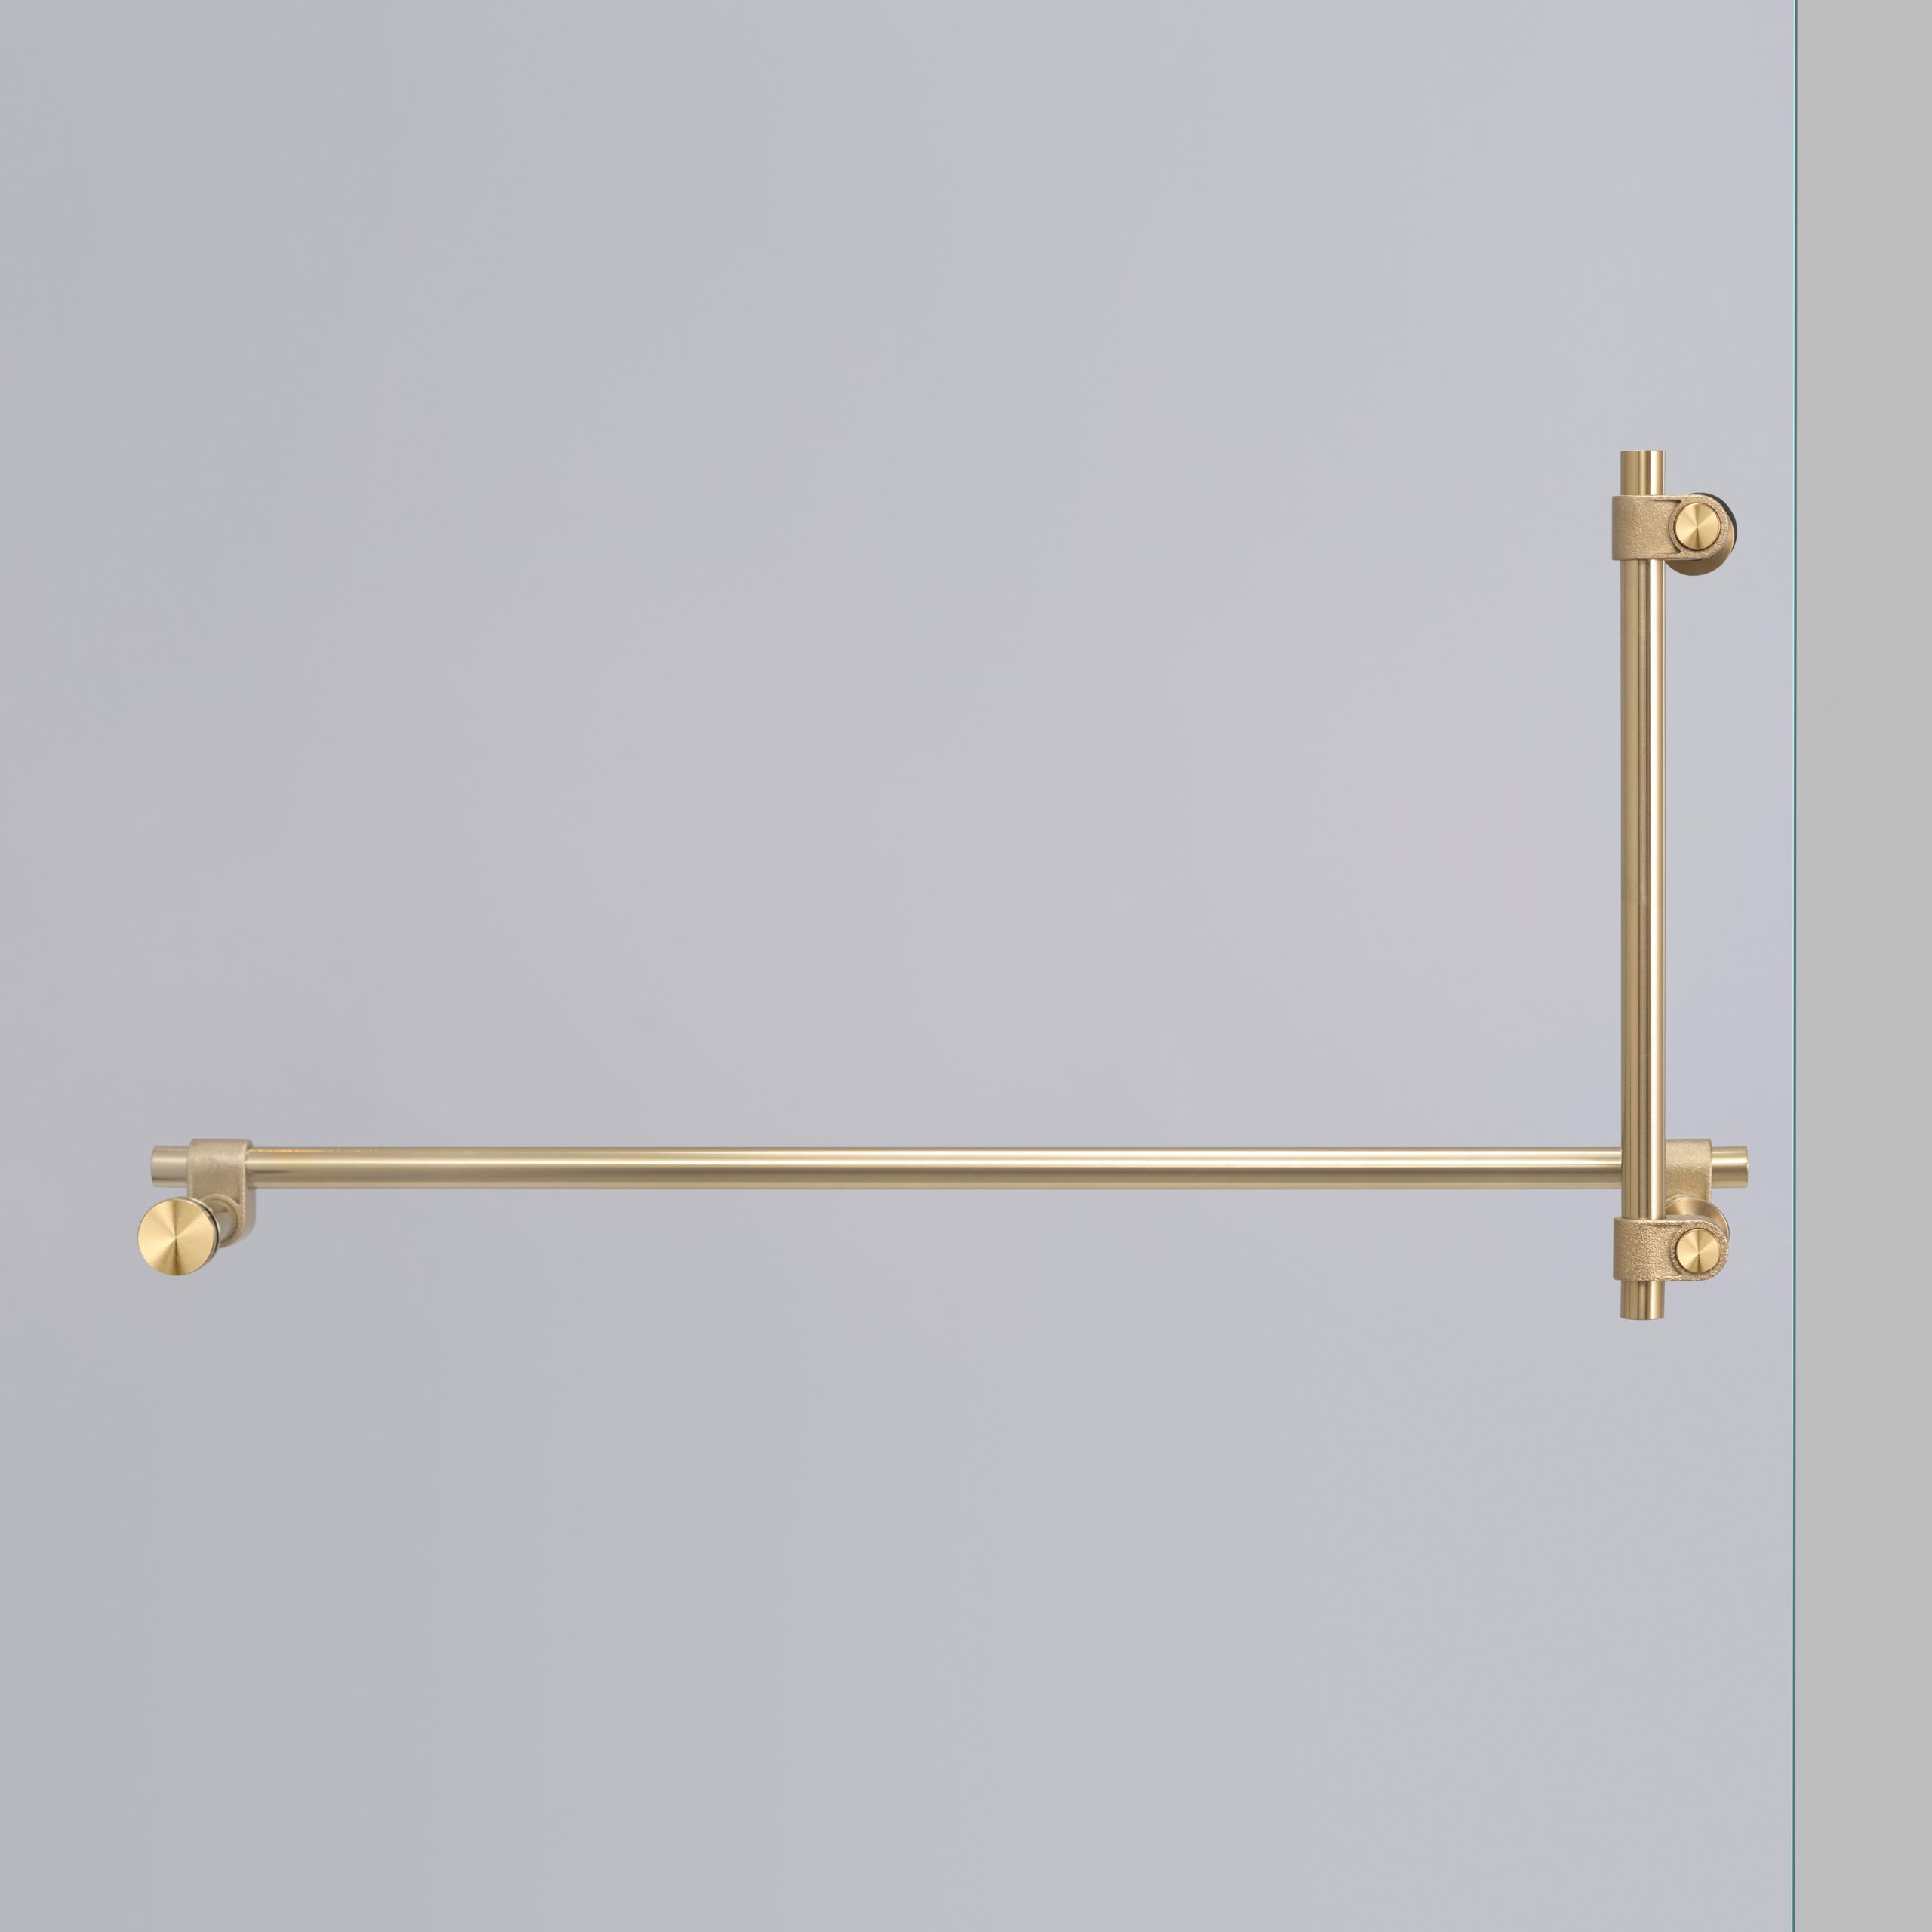 https://www.busterandpunch.com/us/wp-content/uploads/sites/2/2022/03/BP_Cast_Towel_Rail_and_Pull_Bar_Brass_FE_Web-scaled.jpg